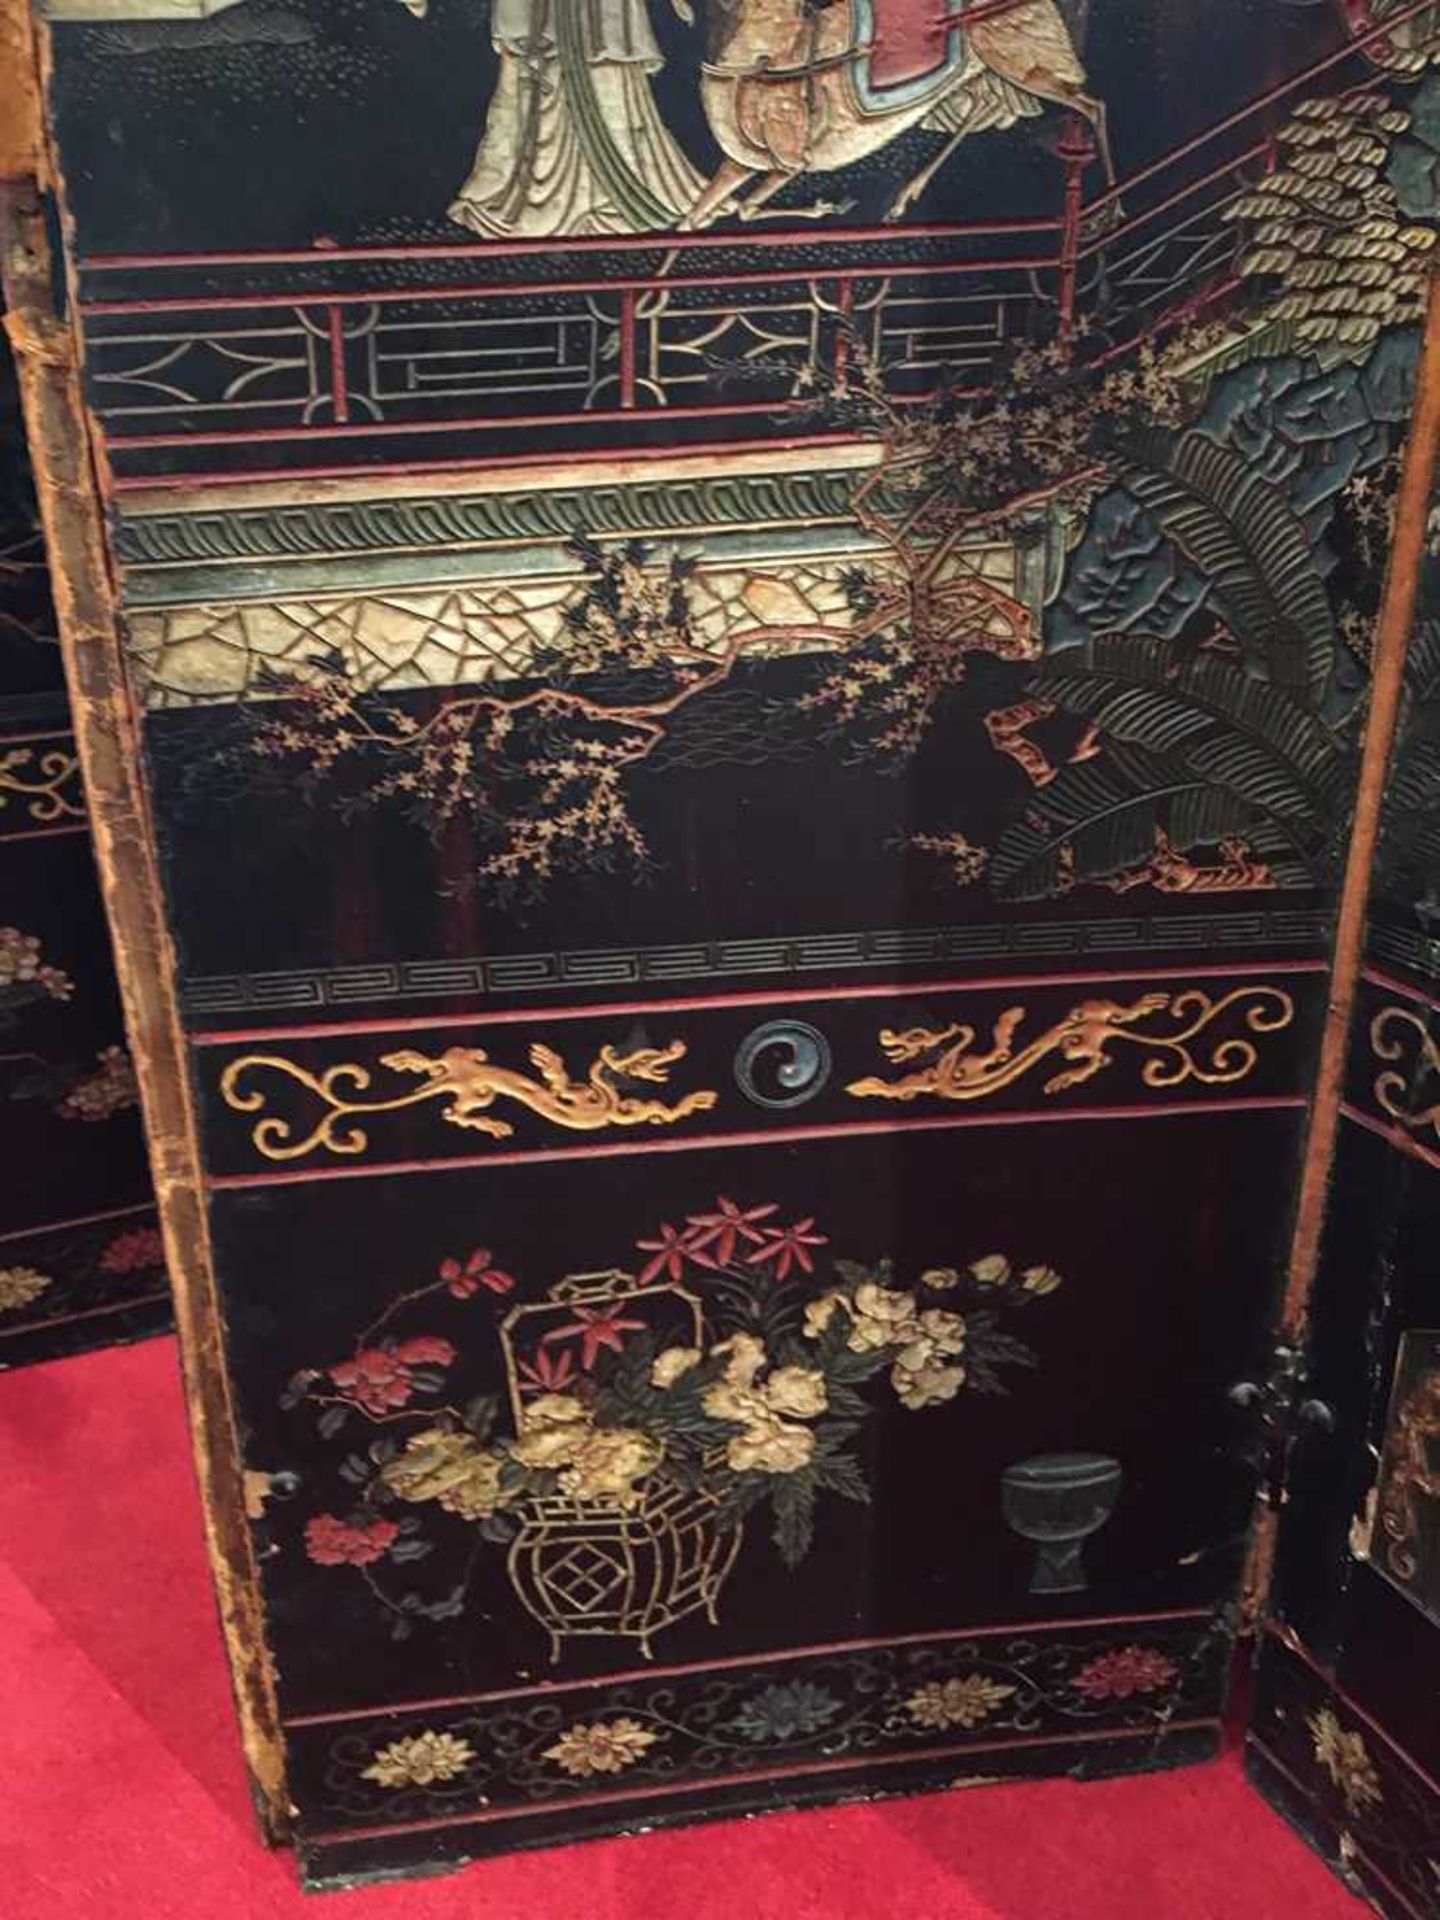 A CHINESE COROMANDEL BLACK LACQUER TWELVE-PANEL SCREEN QING DYNASTY, 18TH CENTURY - Image 42 of 72